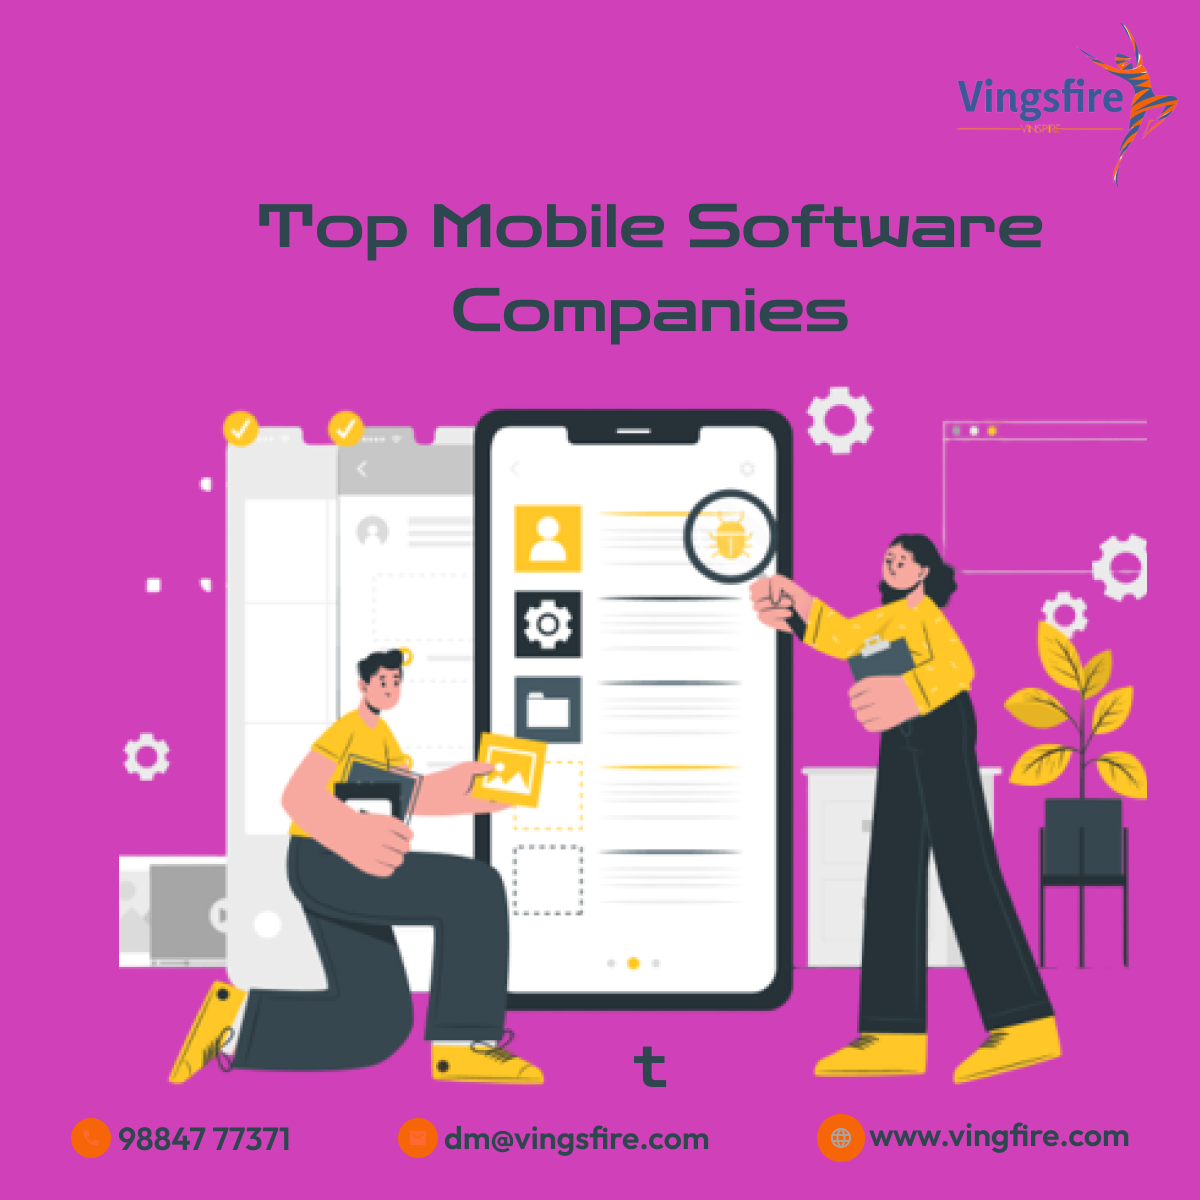 Top Mobile Software Companies